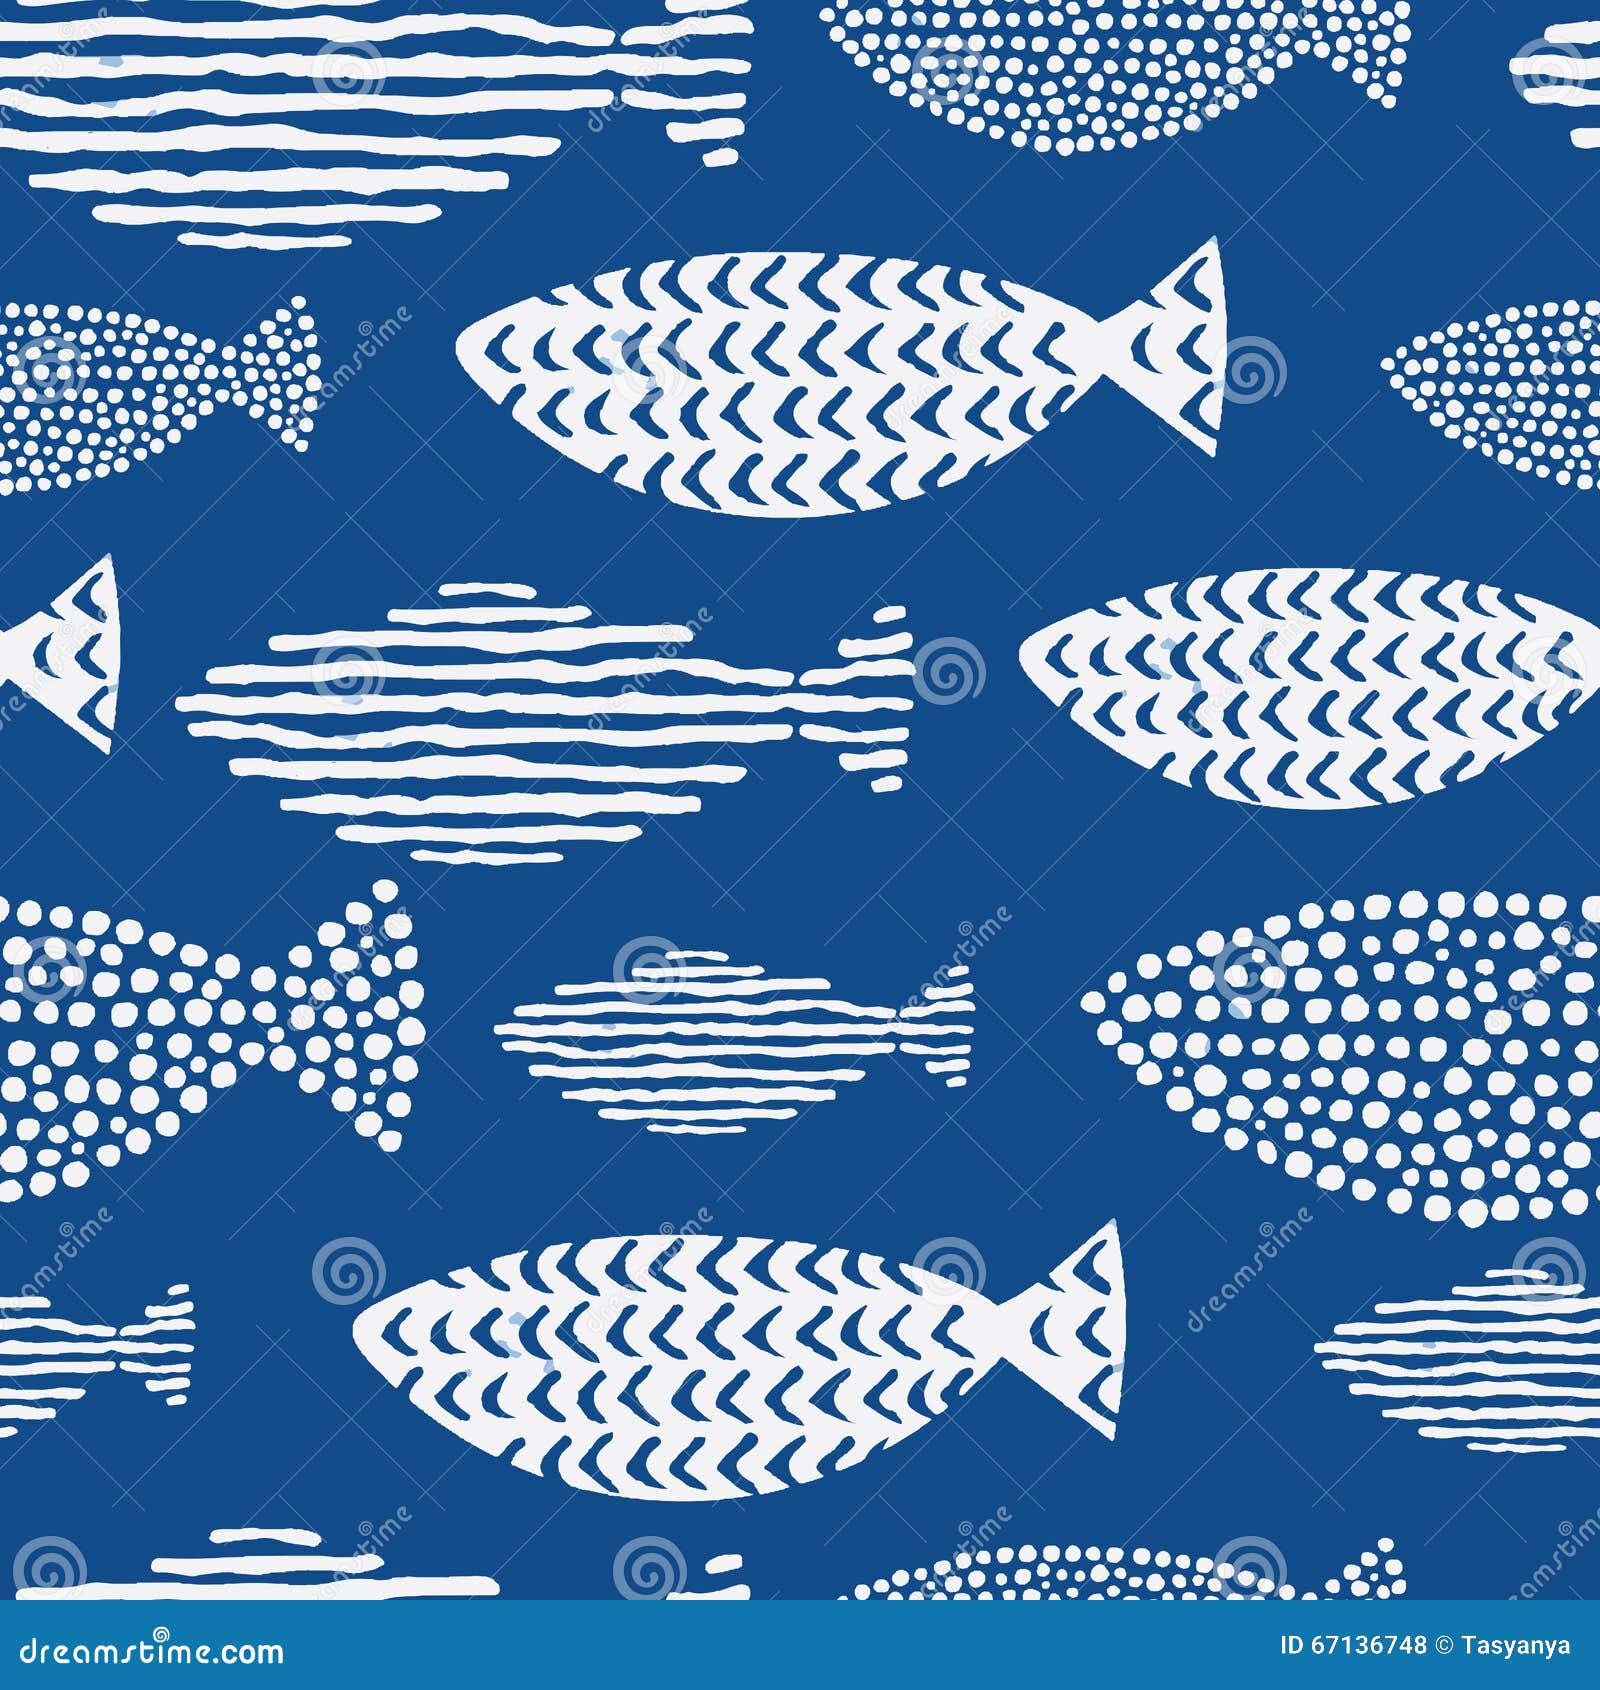 light watercolor fishes. seamlessly tiling fish pattern.